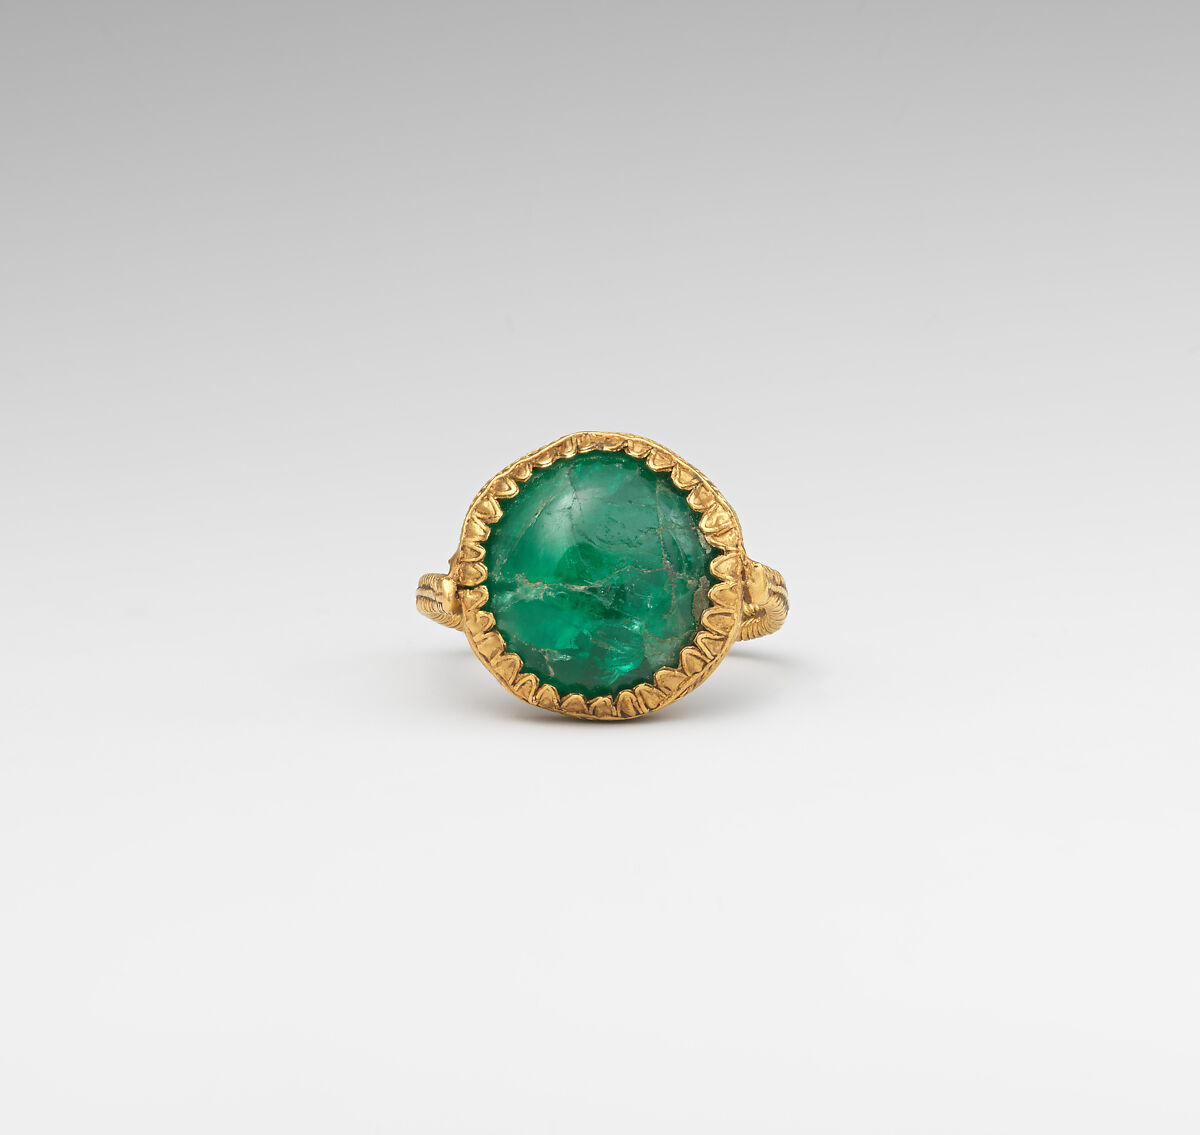 Gold ring set with an emerald, Gold, emerald, Greek 